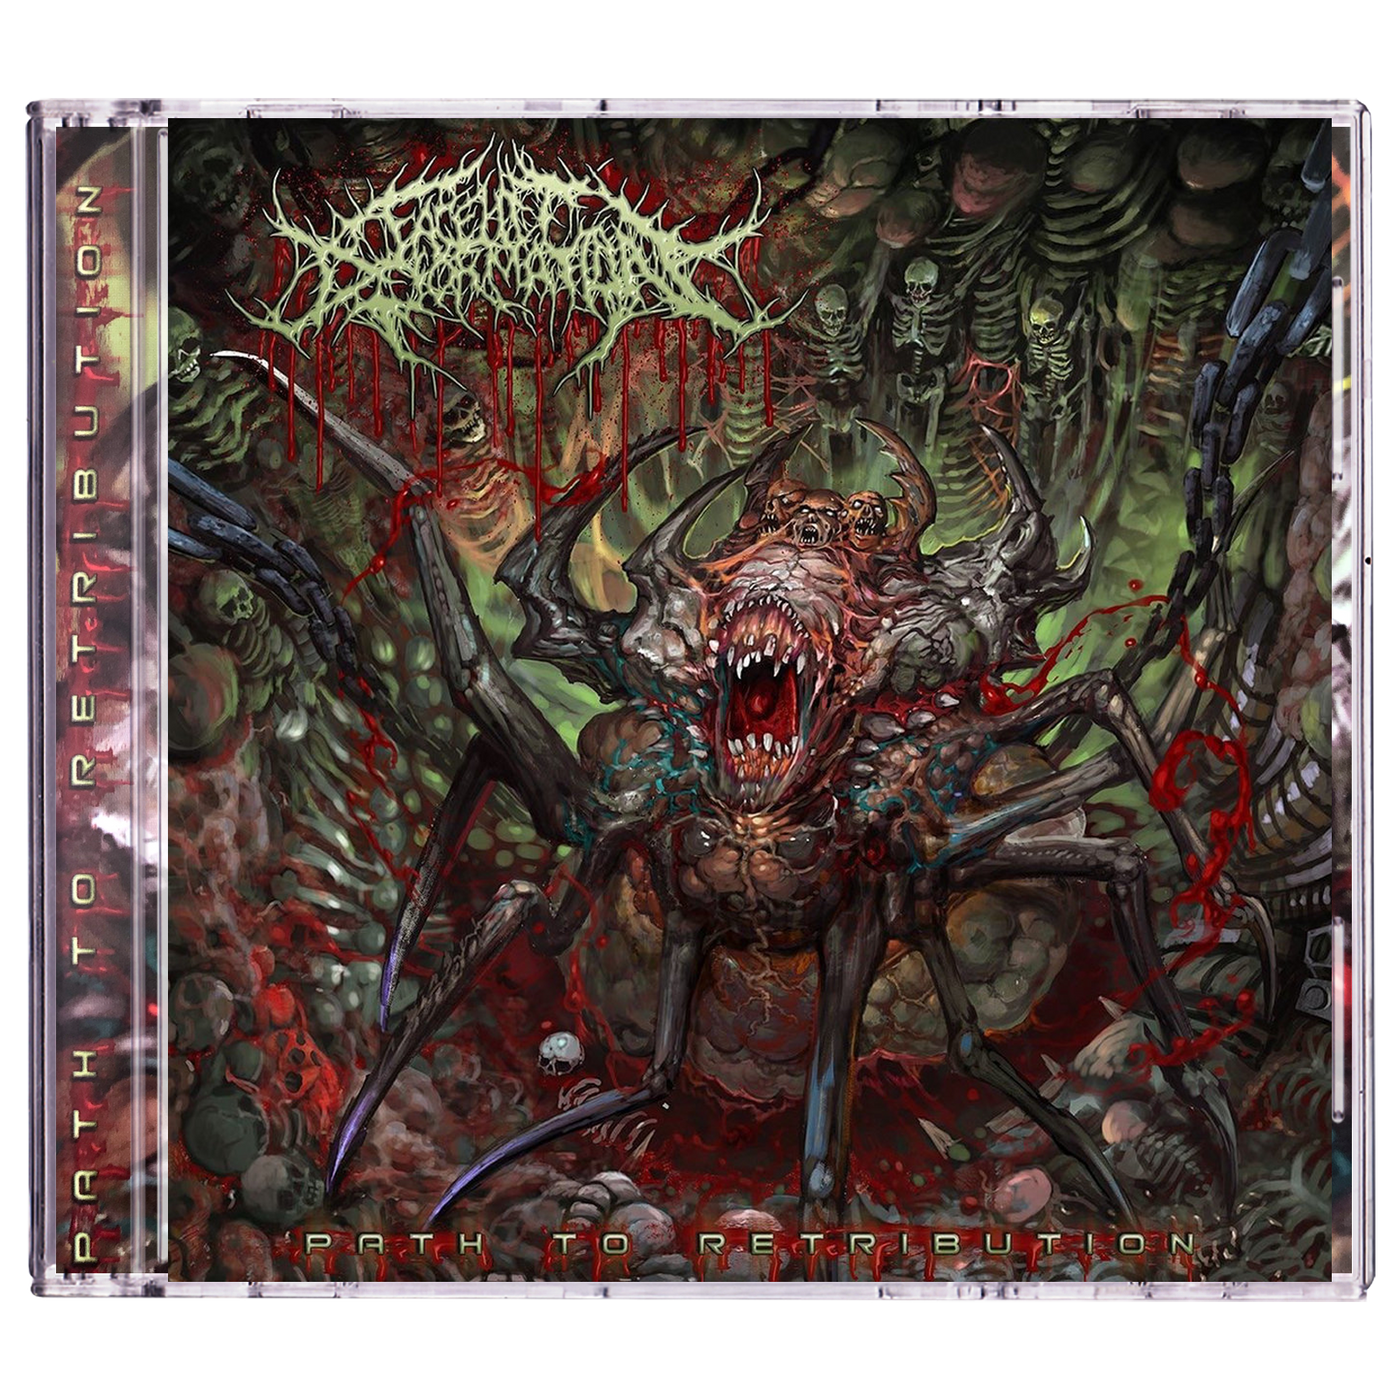 Facelift Deformation 'Path to Retribution' CD